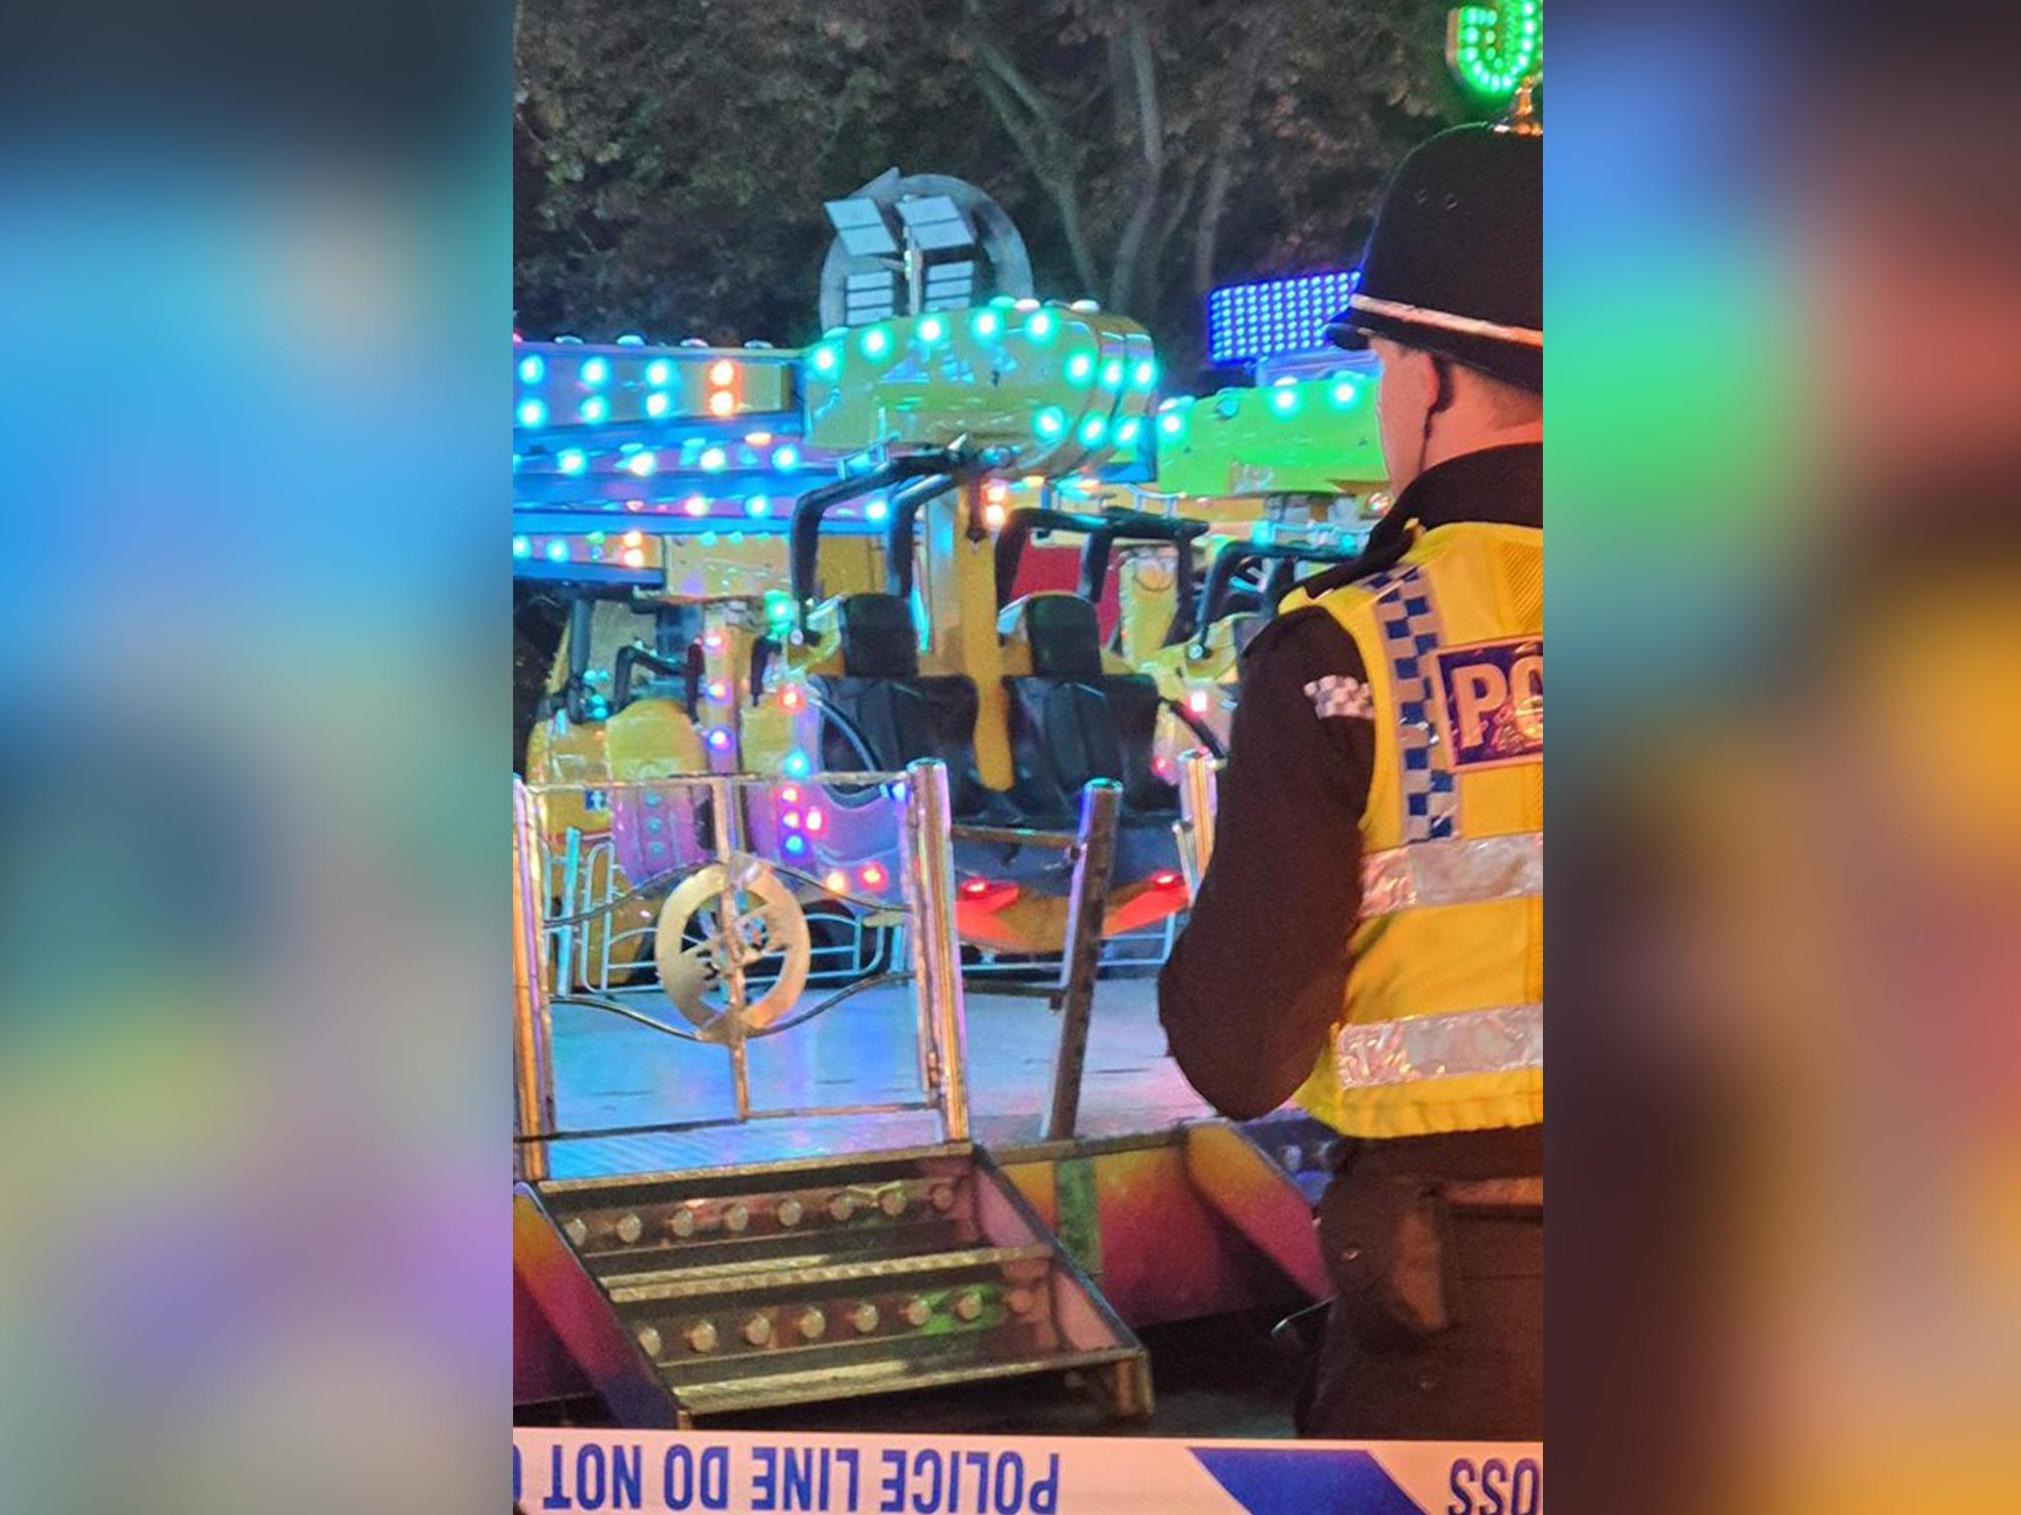 A woman was reportedly thrown from the spinning attraction and into another nearby ride